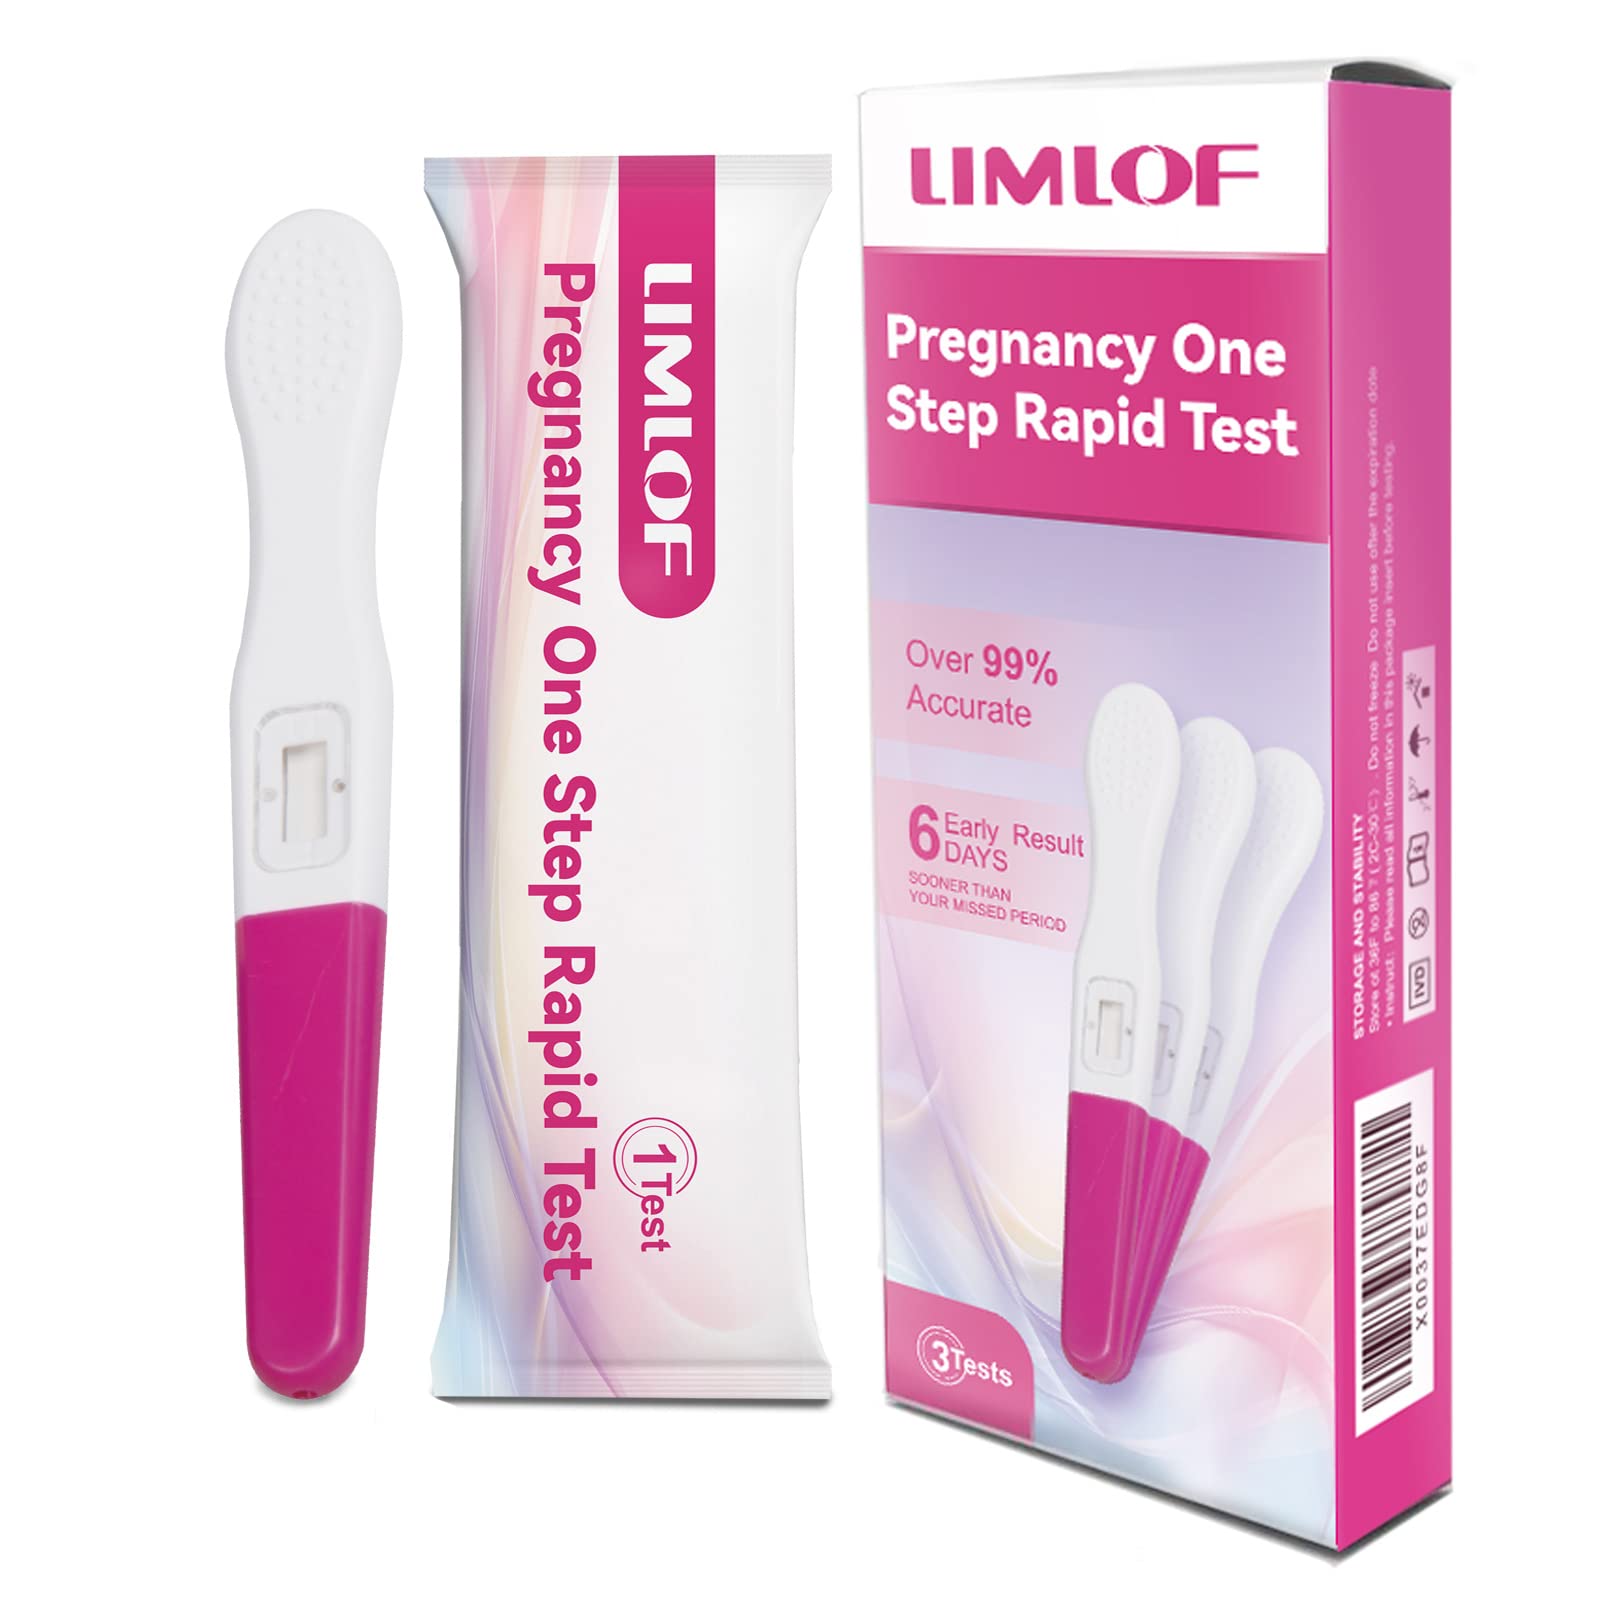 hCG Pregnancy Tests: Are They Accurate & How to Read Results